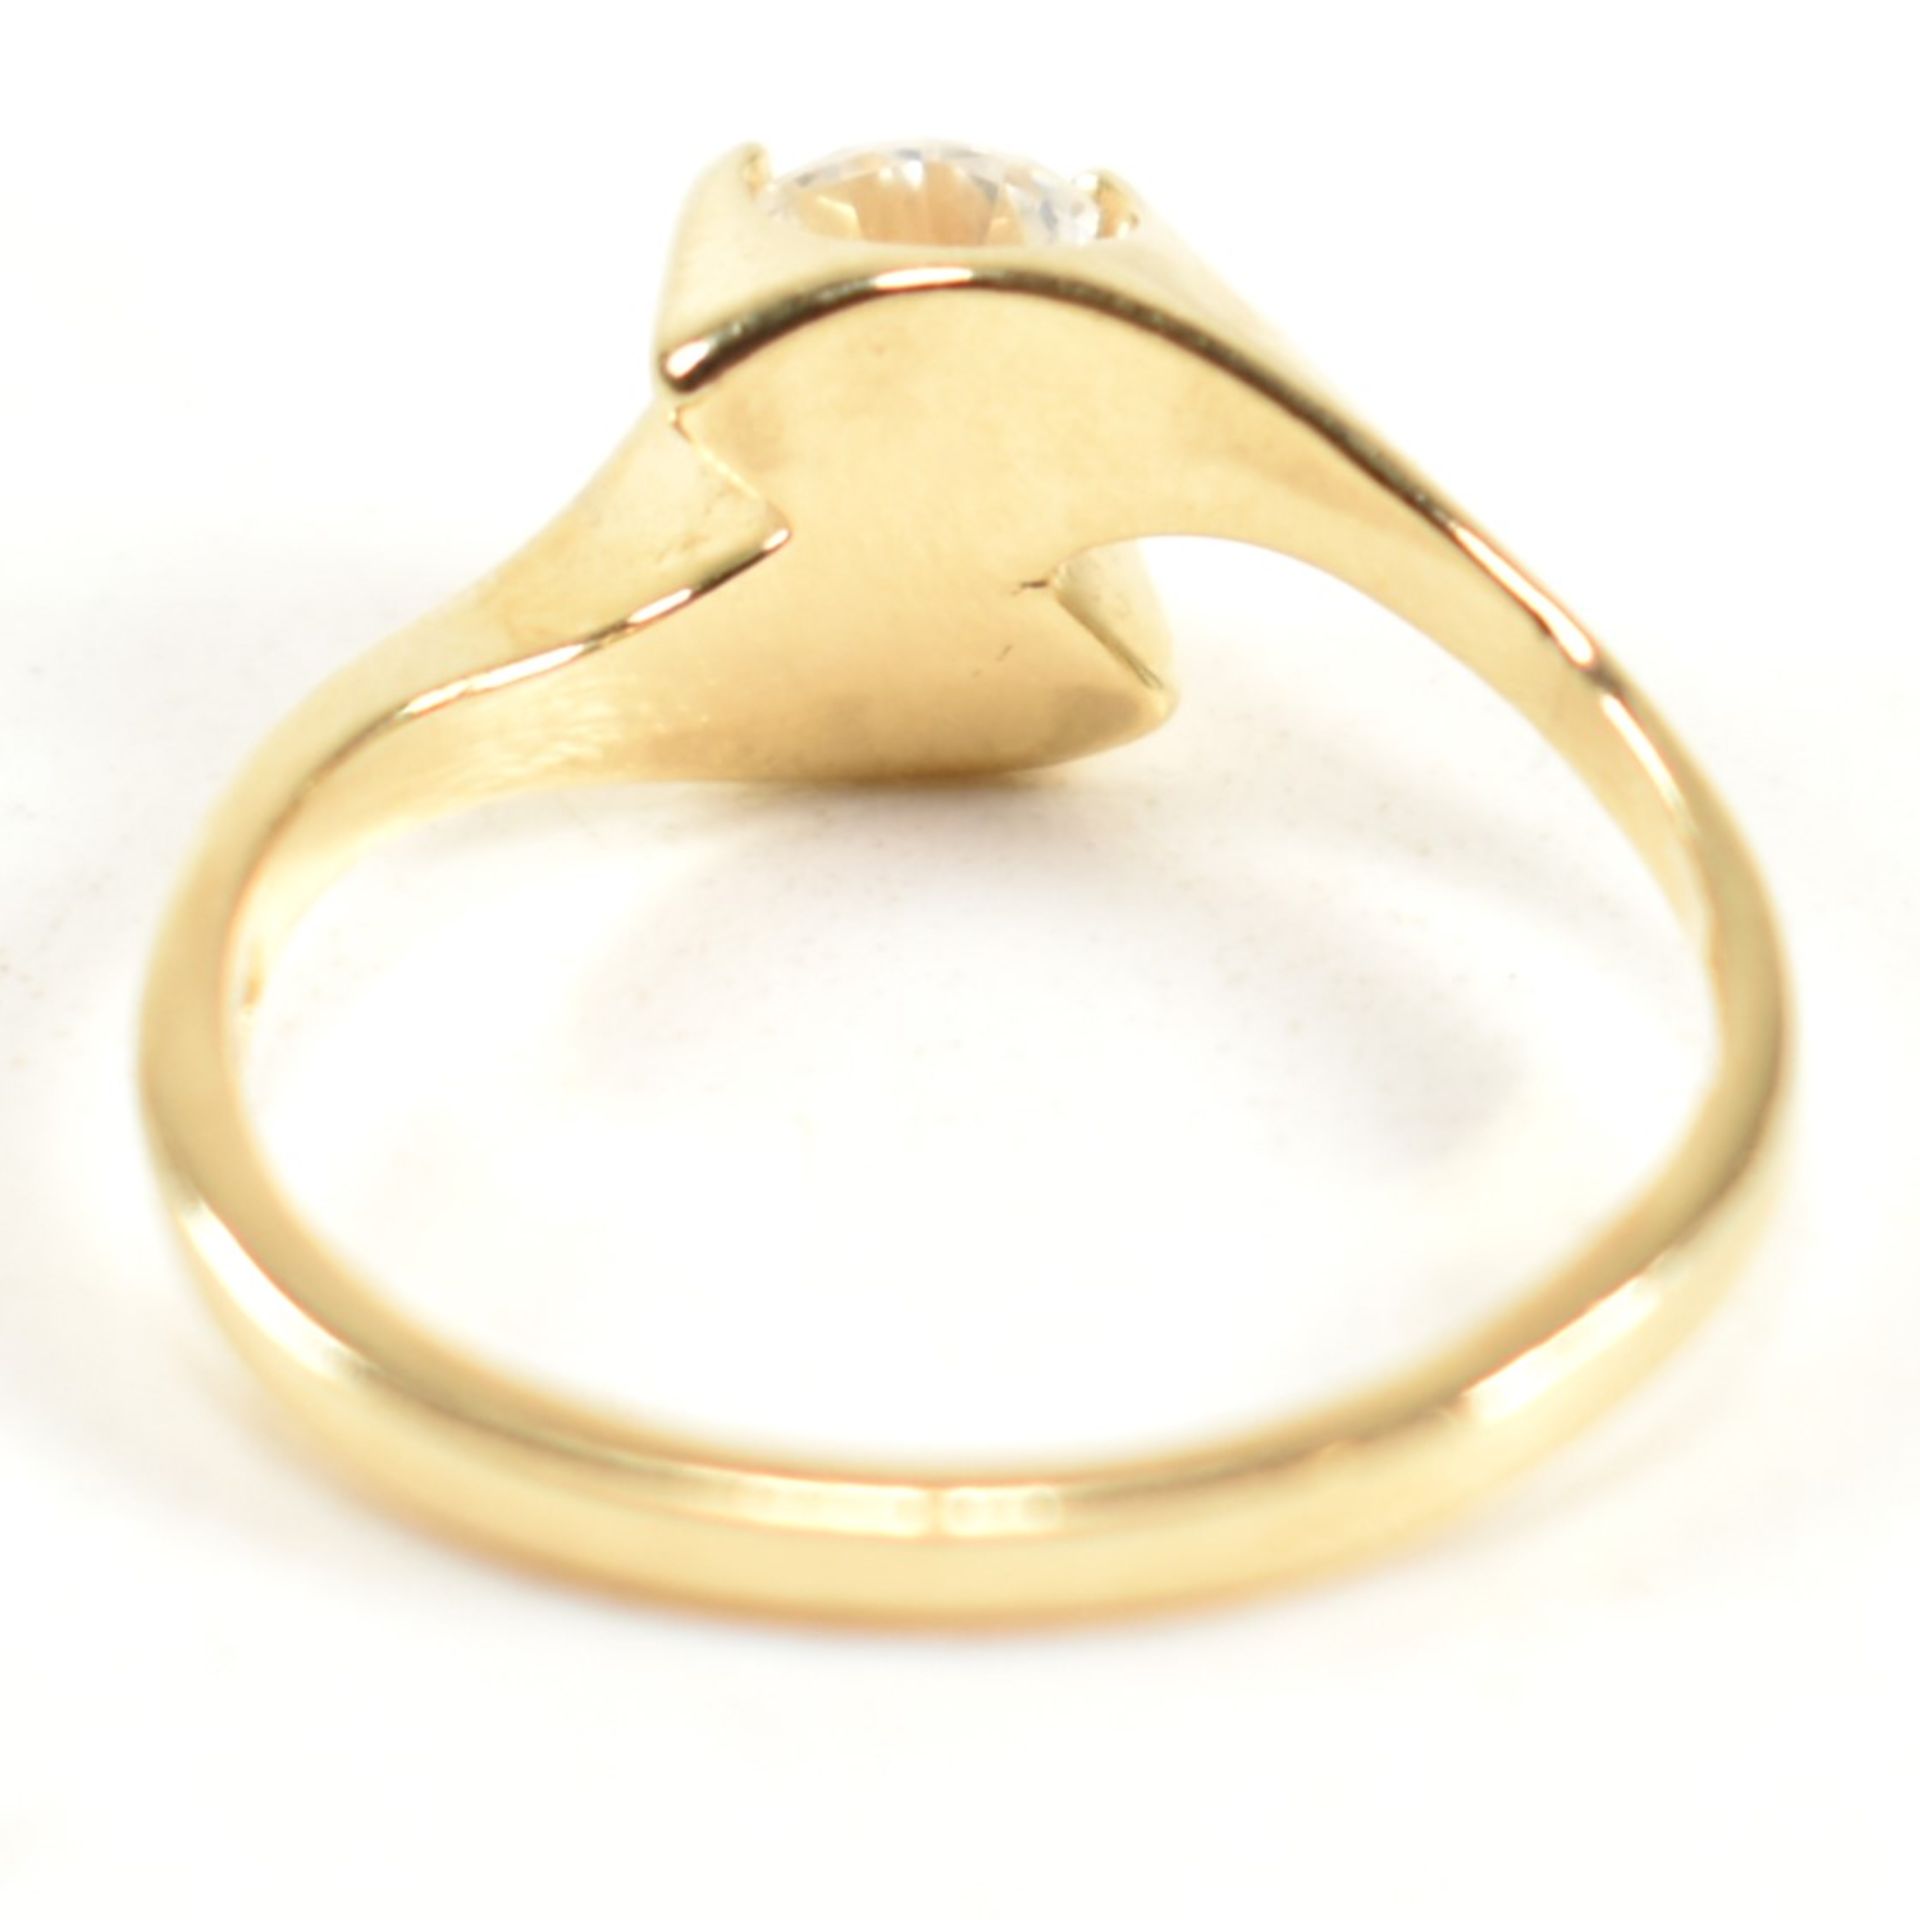 HALLMARKED 14CT GOLD & CZ CROSSOVER RING - Image 2 of 9